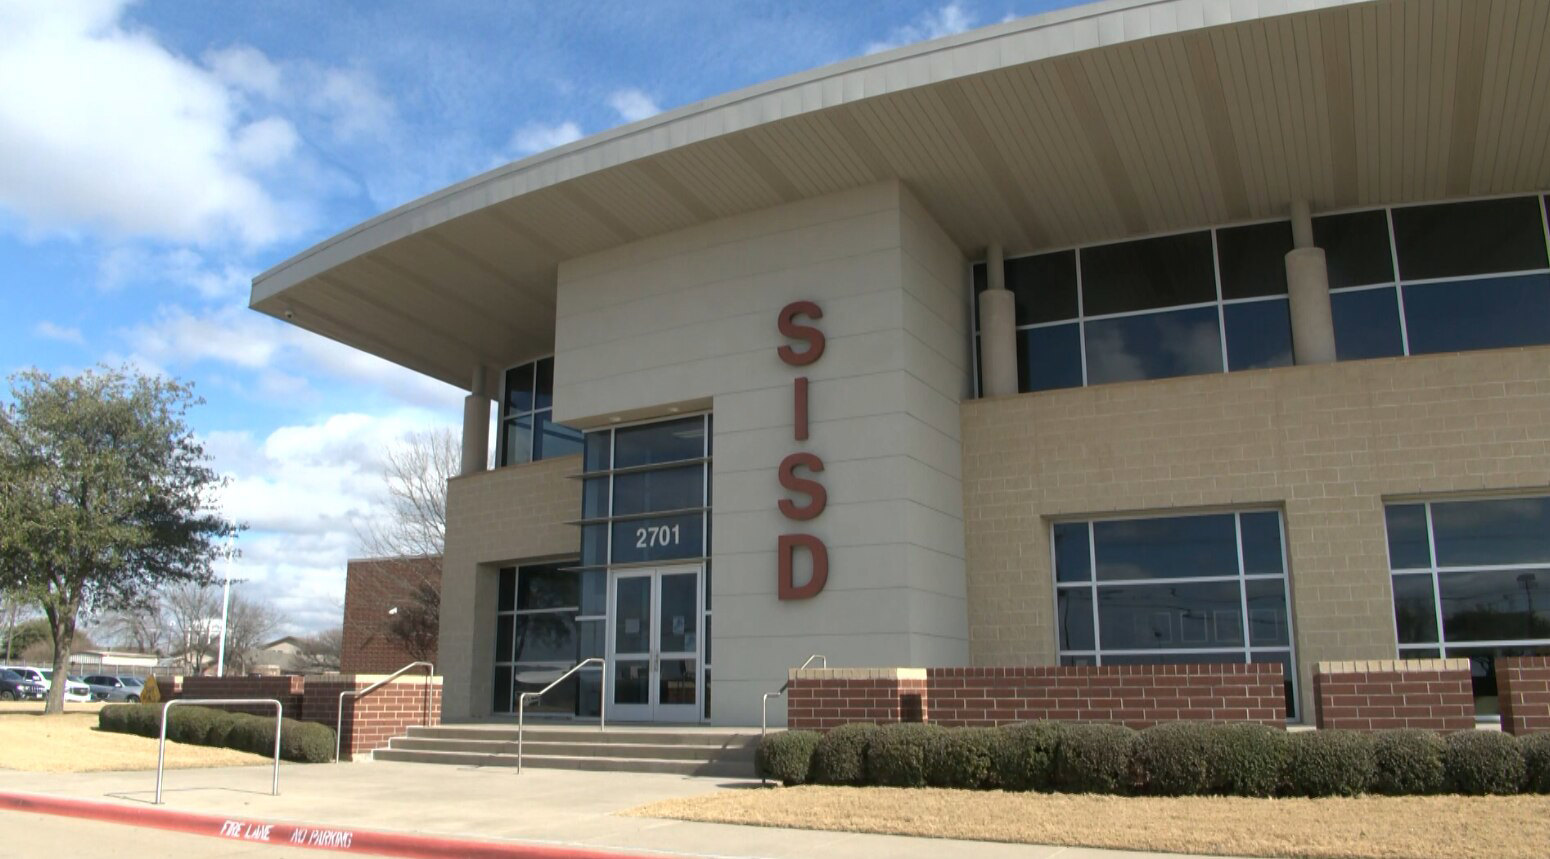 SISD students will eat free during 20232024 school year